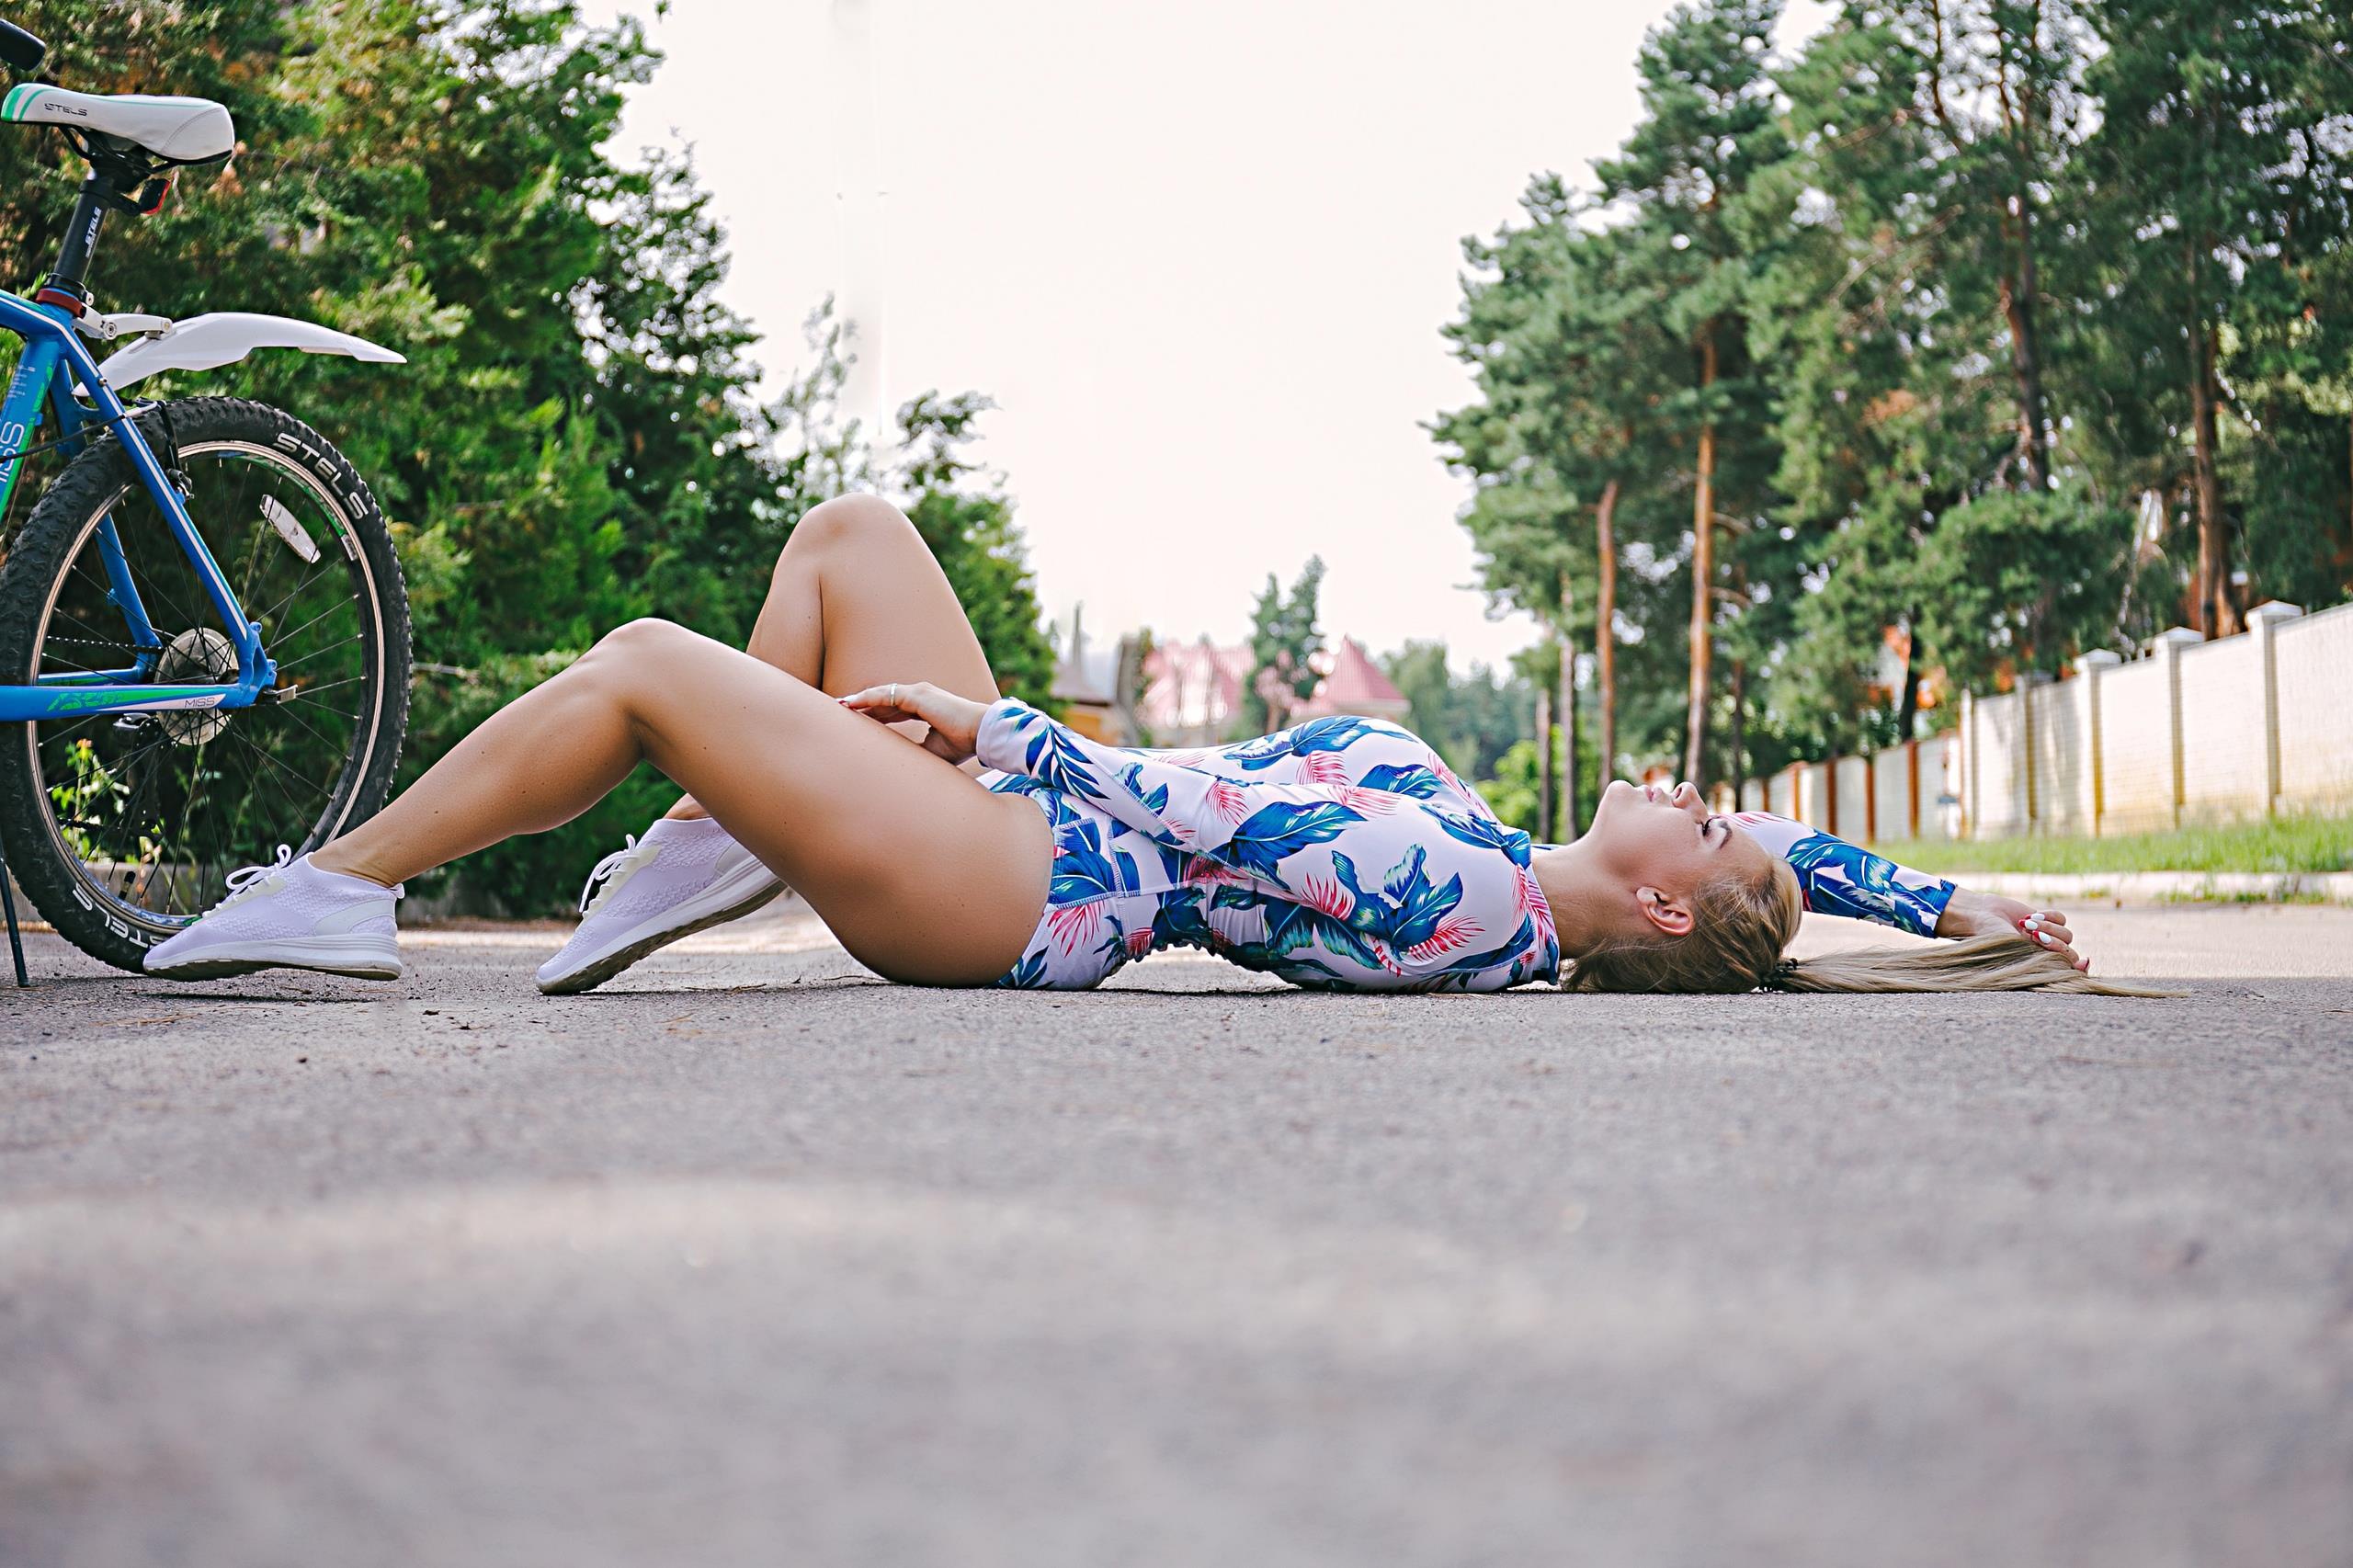 People 2560x1706 women outdoors urban lying down bicycle women blonde ponytail women with bicycles bodysuit lying on back